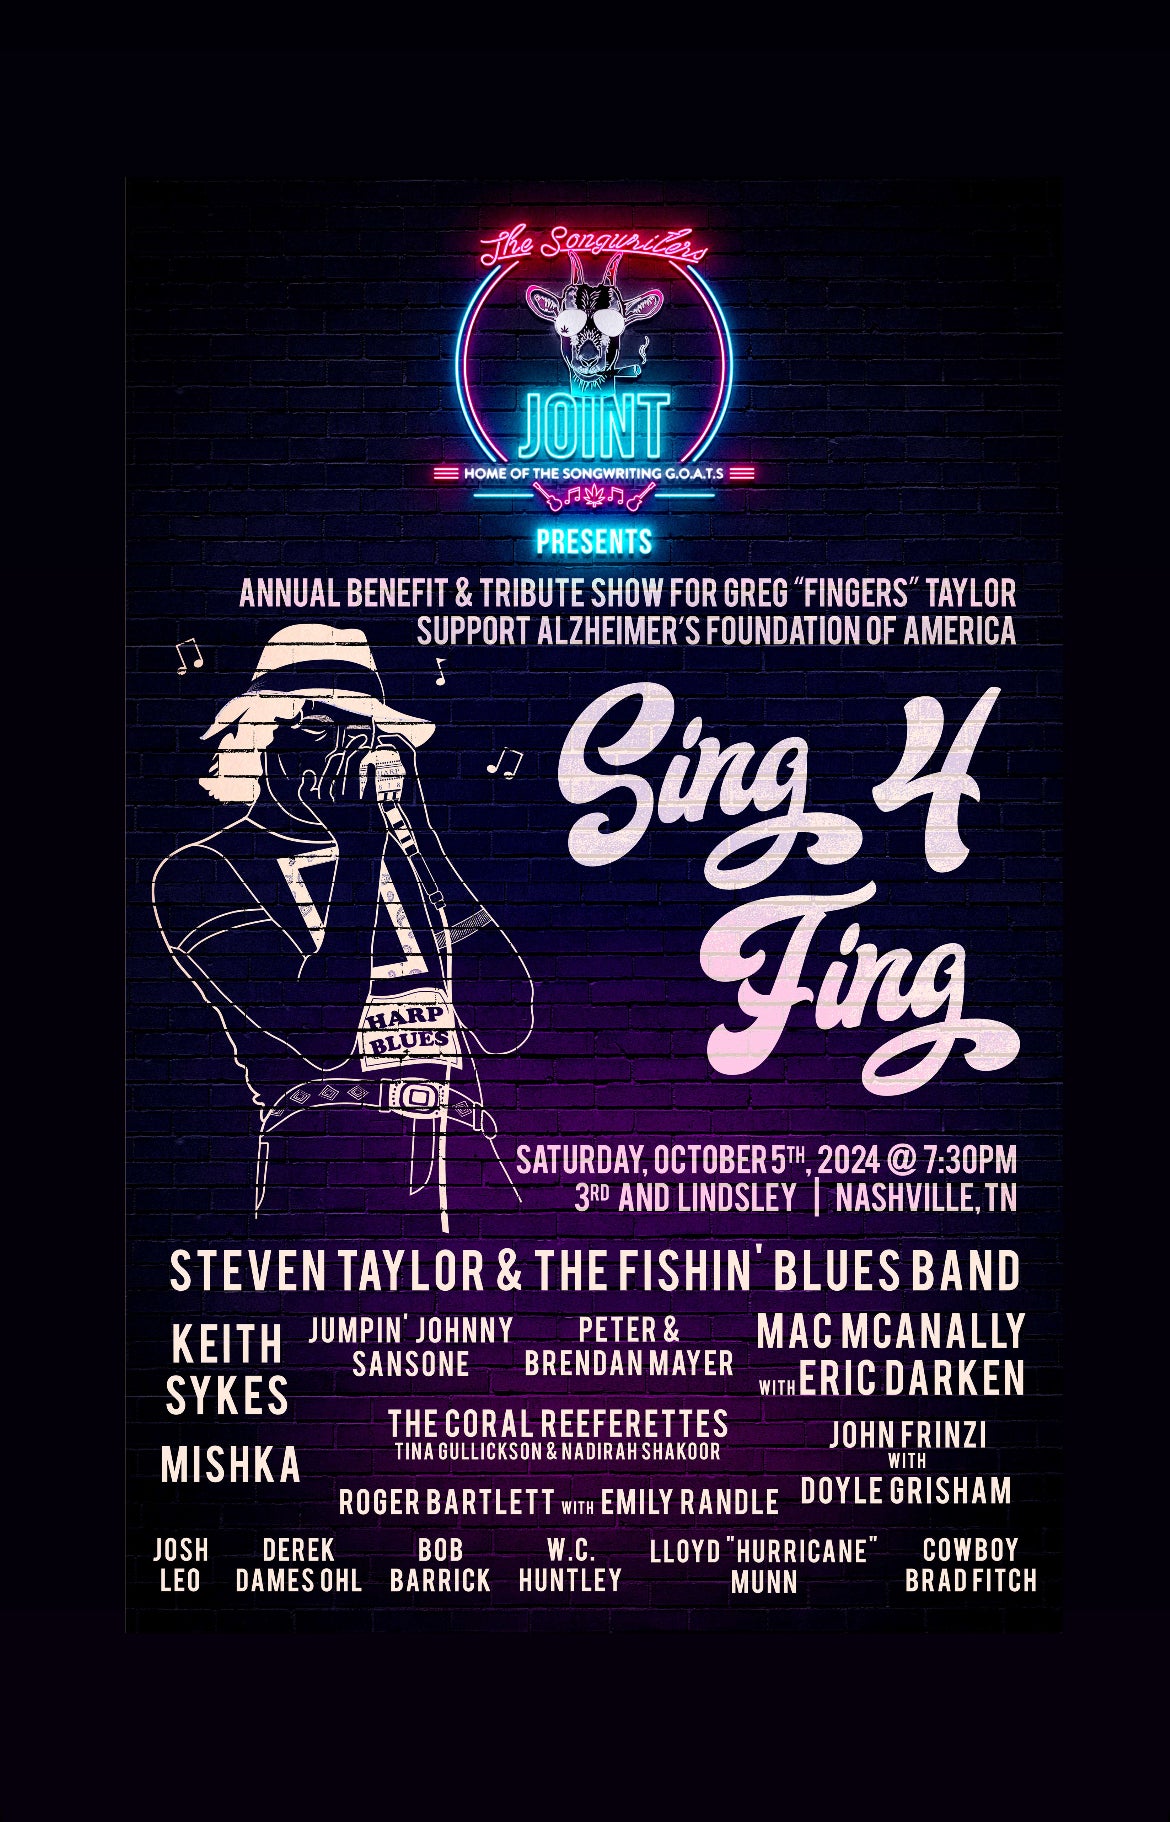 "Sing 4 Fing" Benefit Show